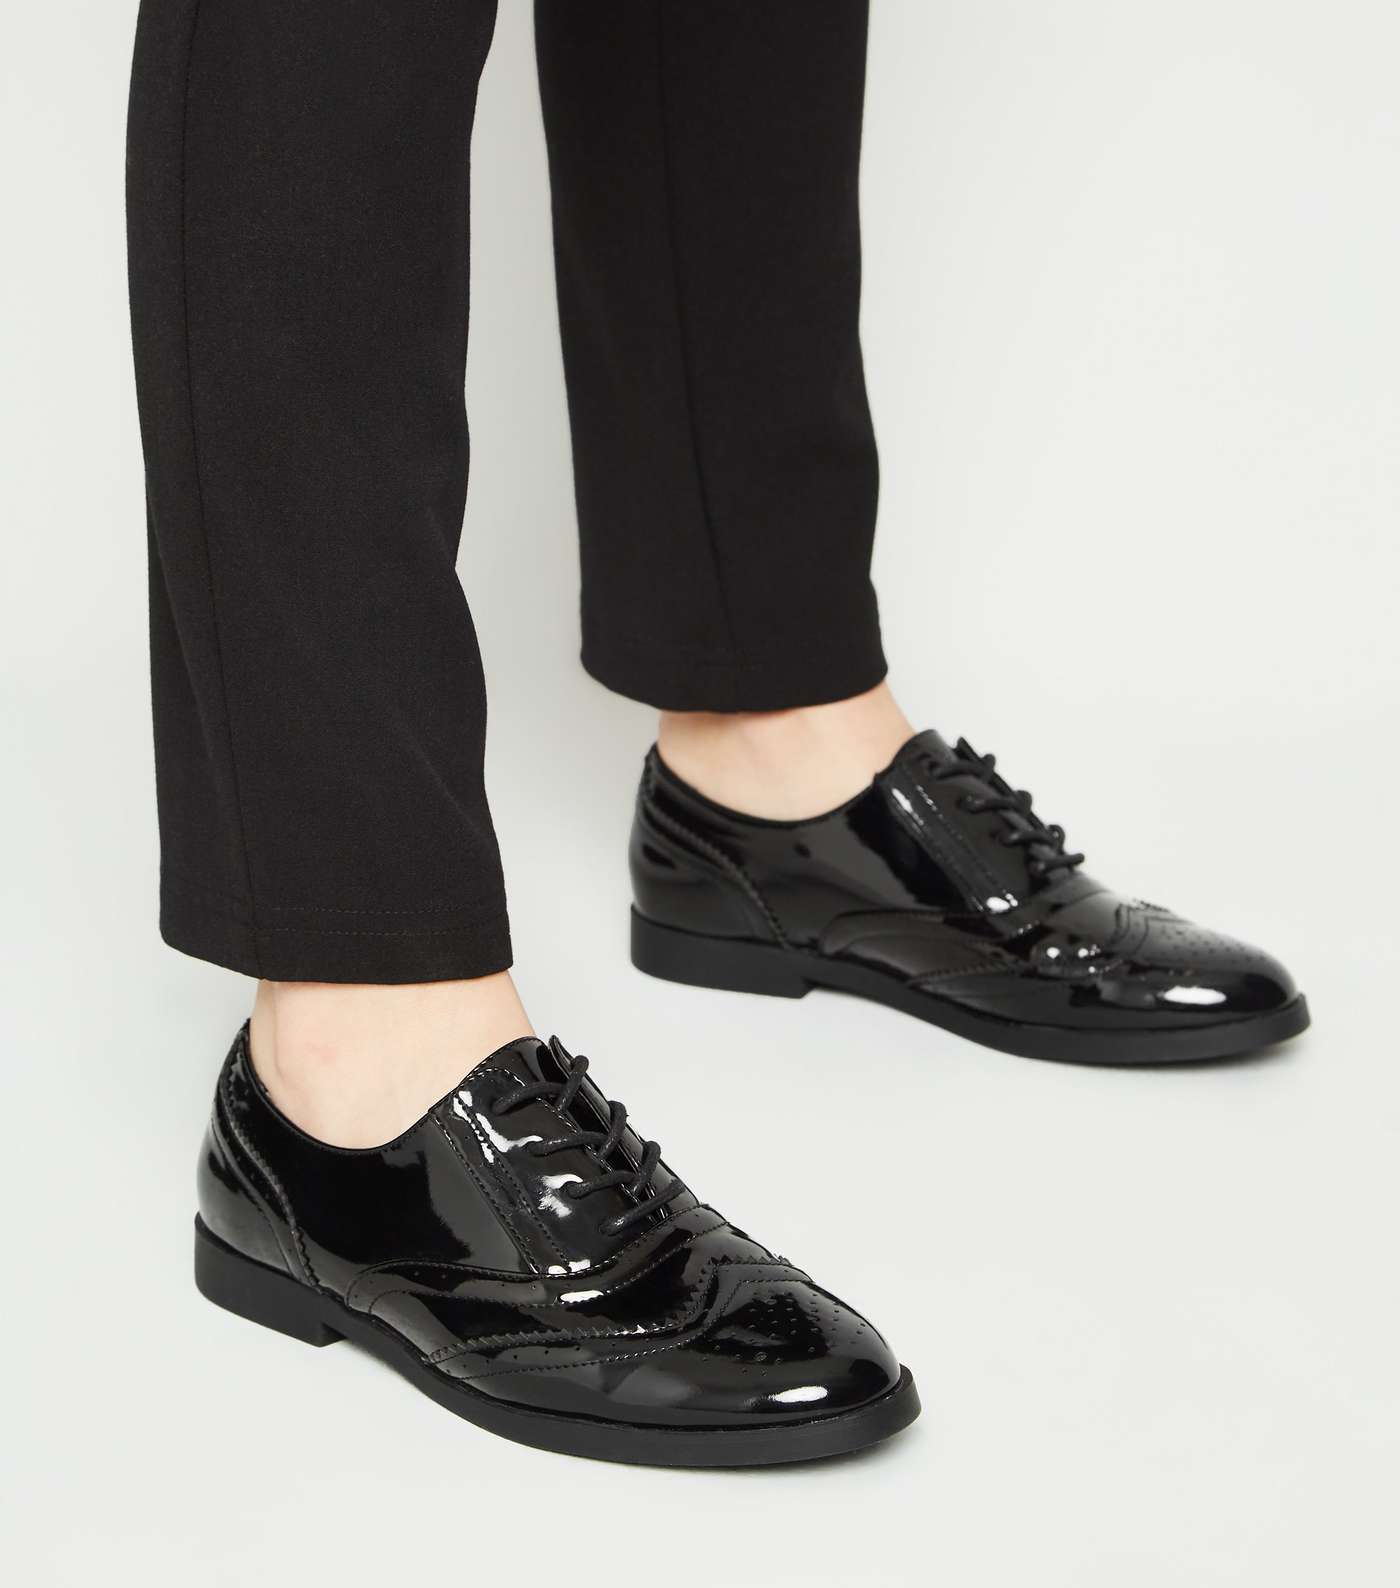 Girls Black Patent Lace Up Brogues Image 2